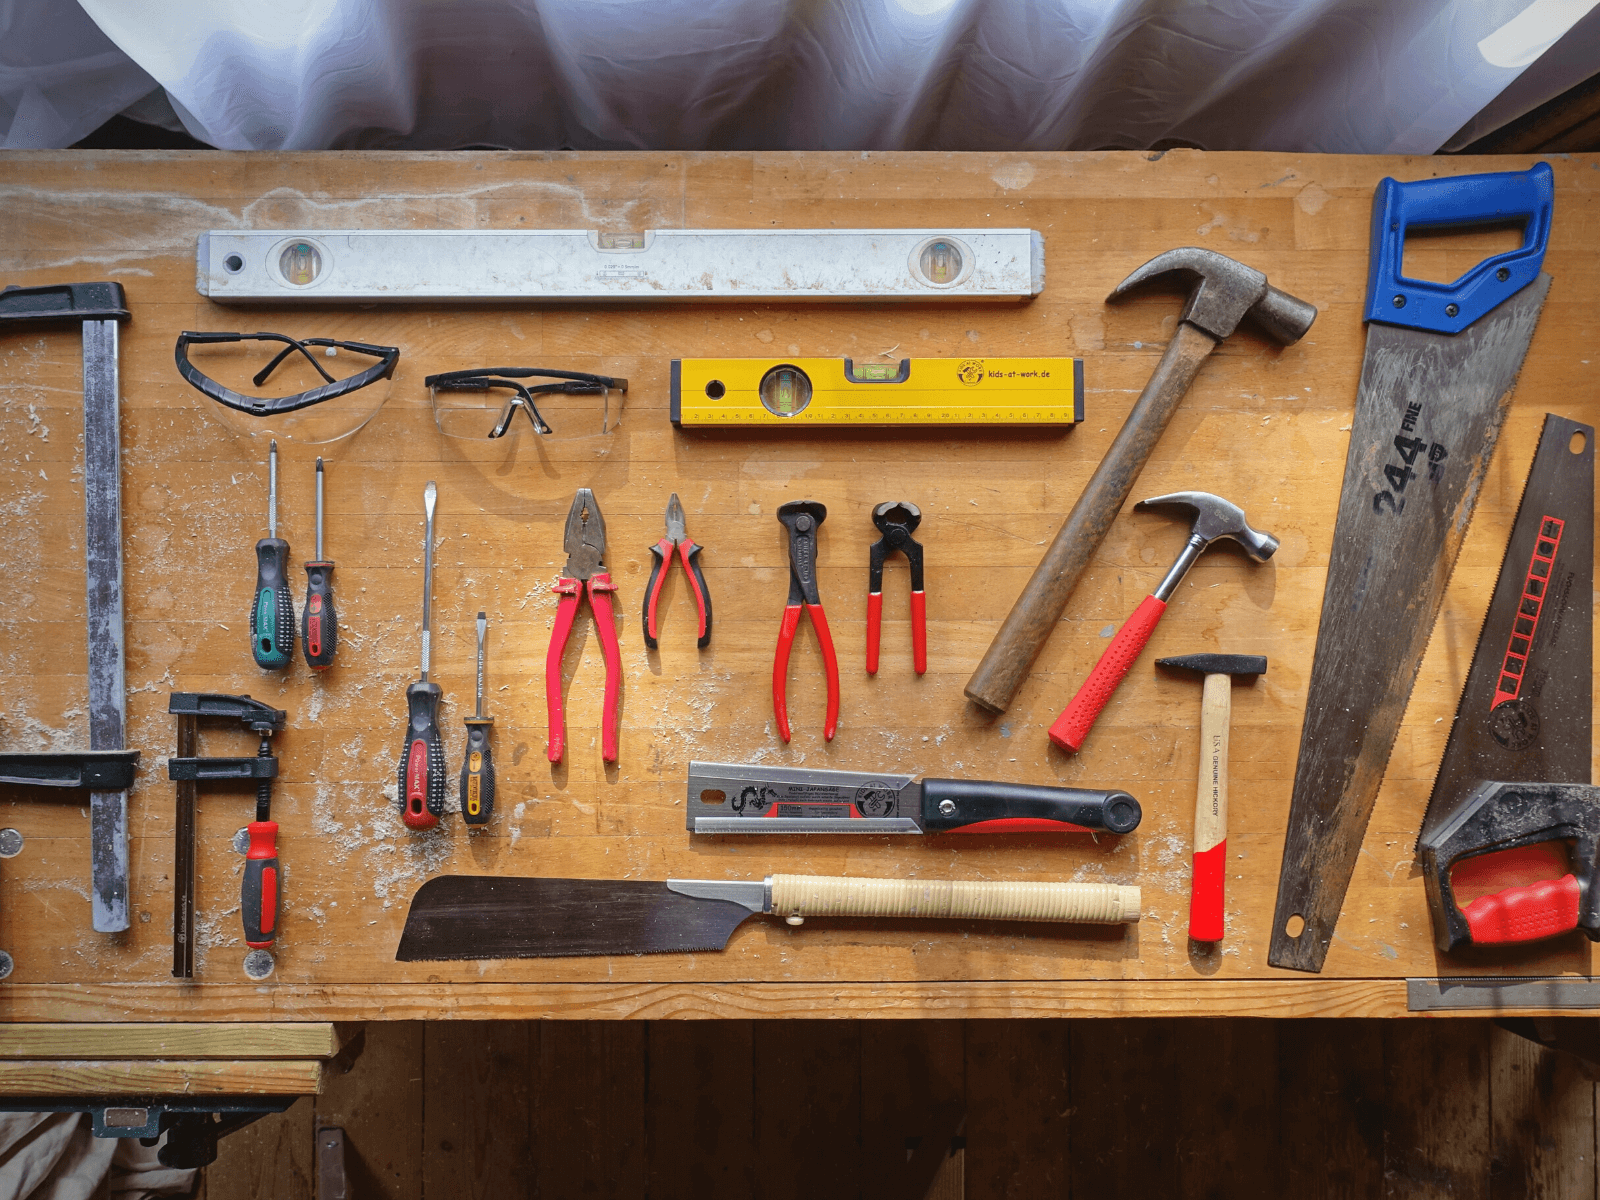 A size comparison: Kids at Work tools with regular adult-sized tools